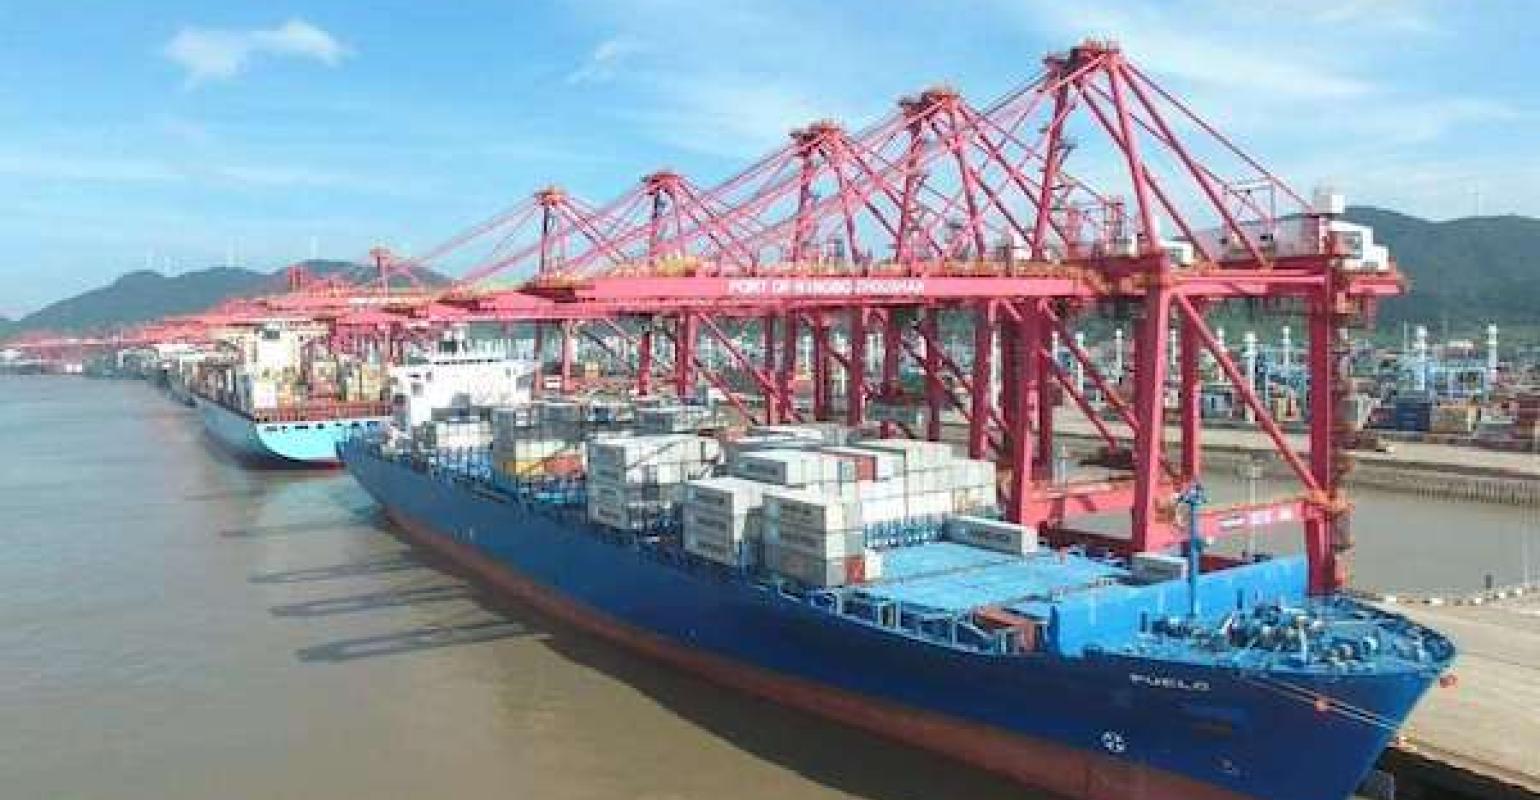 Ningbo-Zhoushan to complete work on 10m teu container terminal in ...